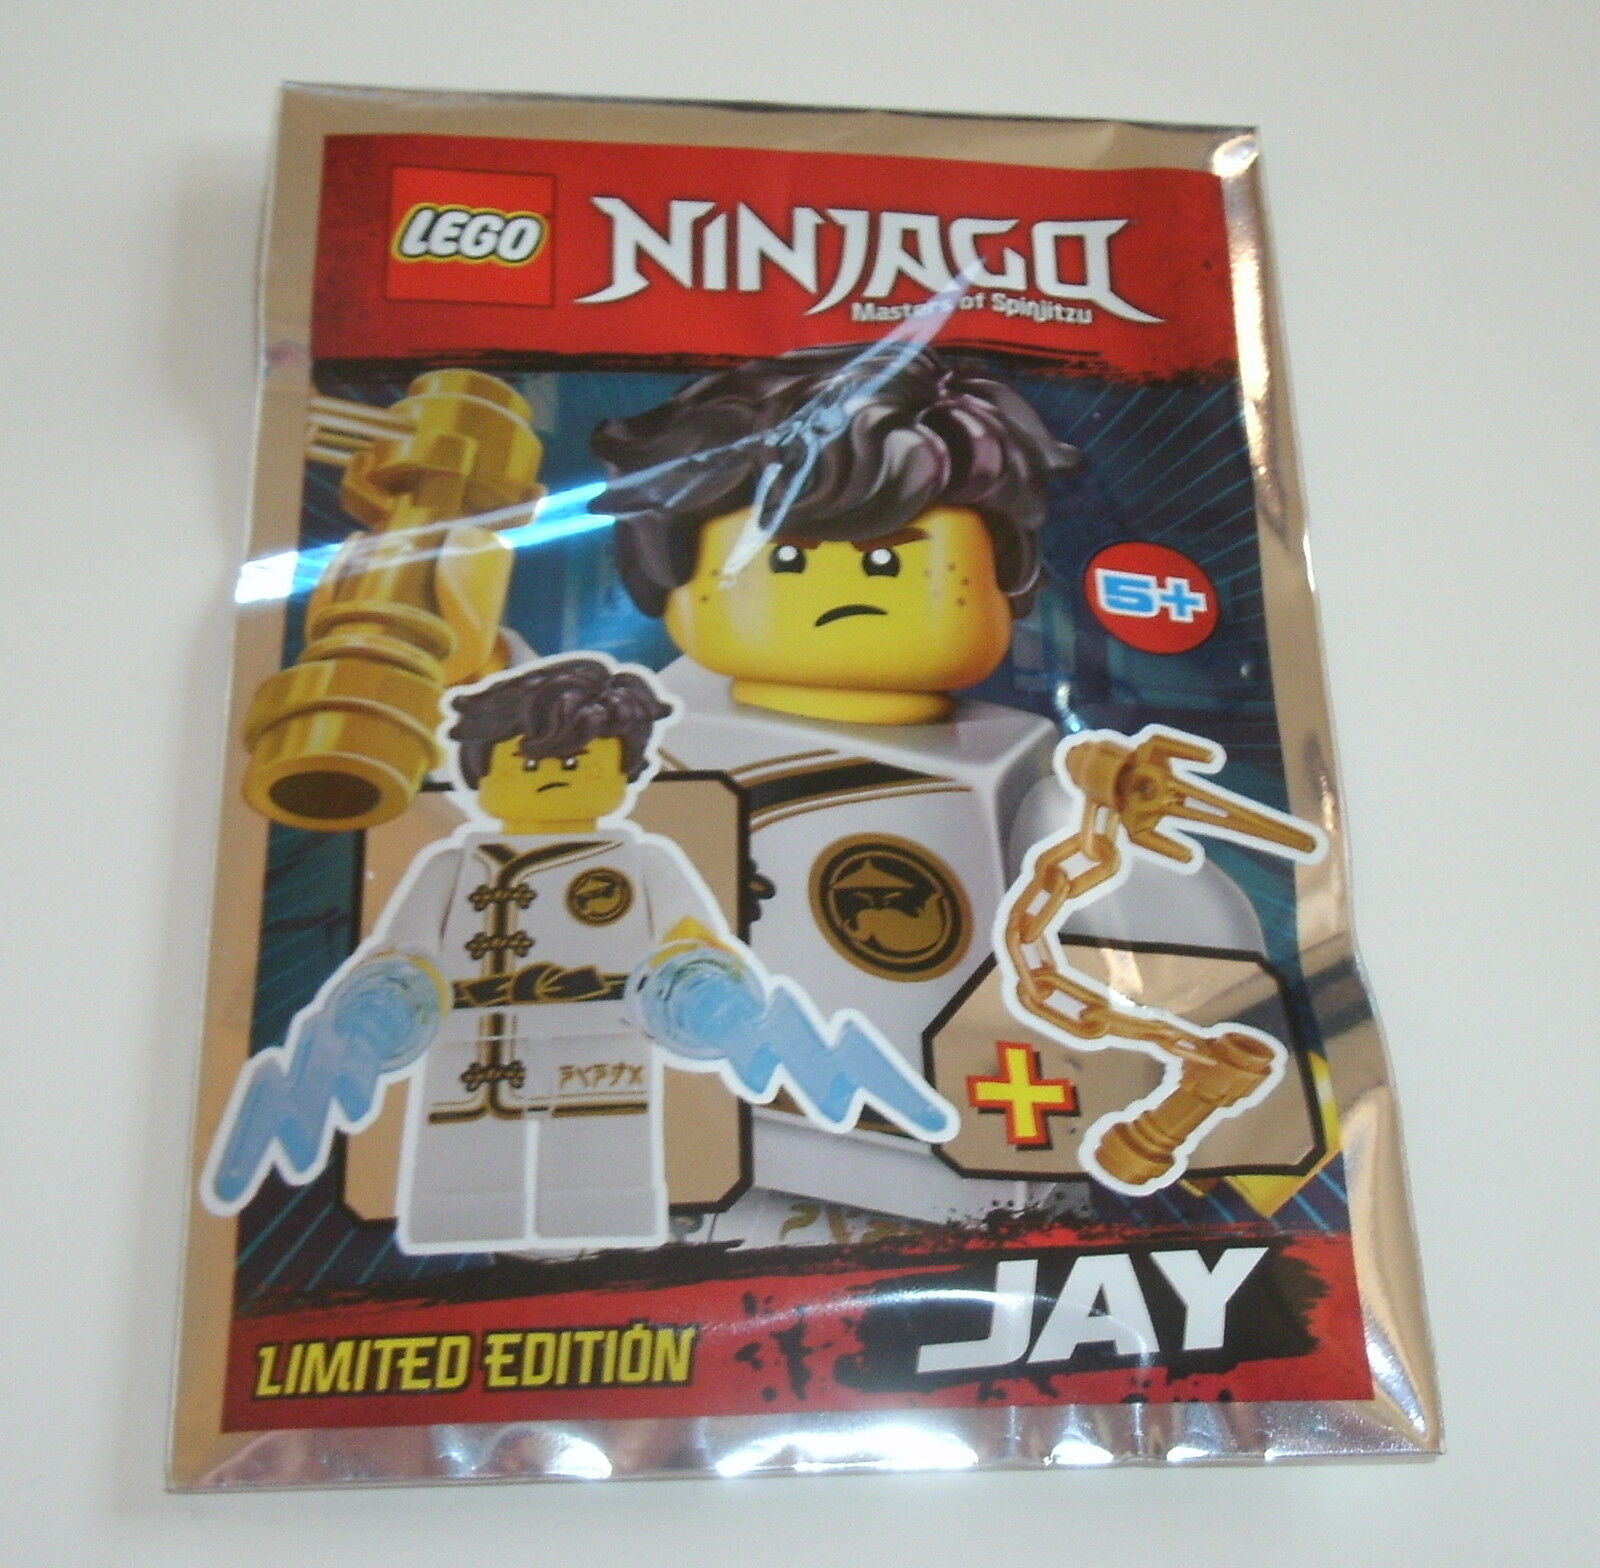 LEGO Ninjago - Minifigures to Choose Limited Edition New & Original Packaging